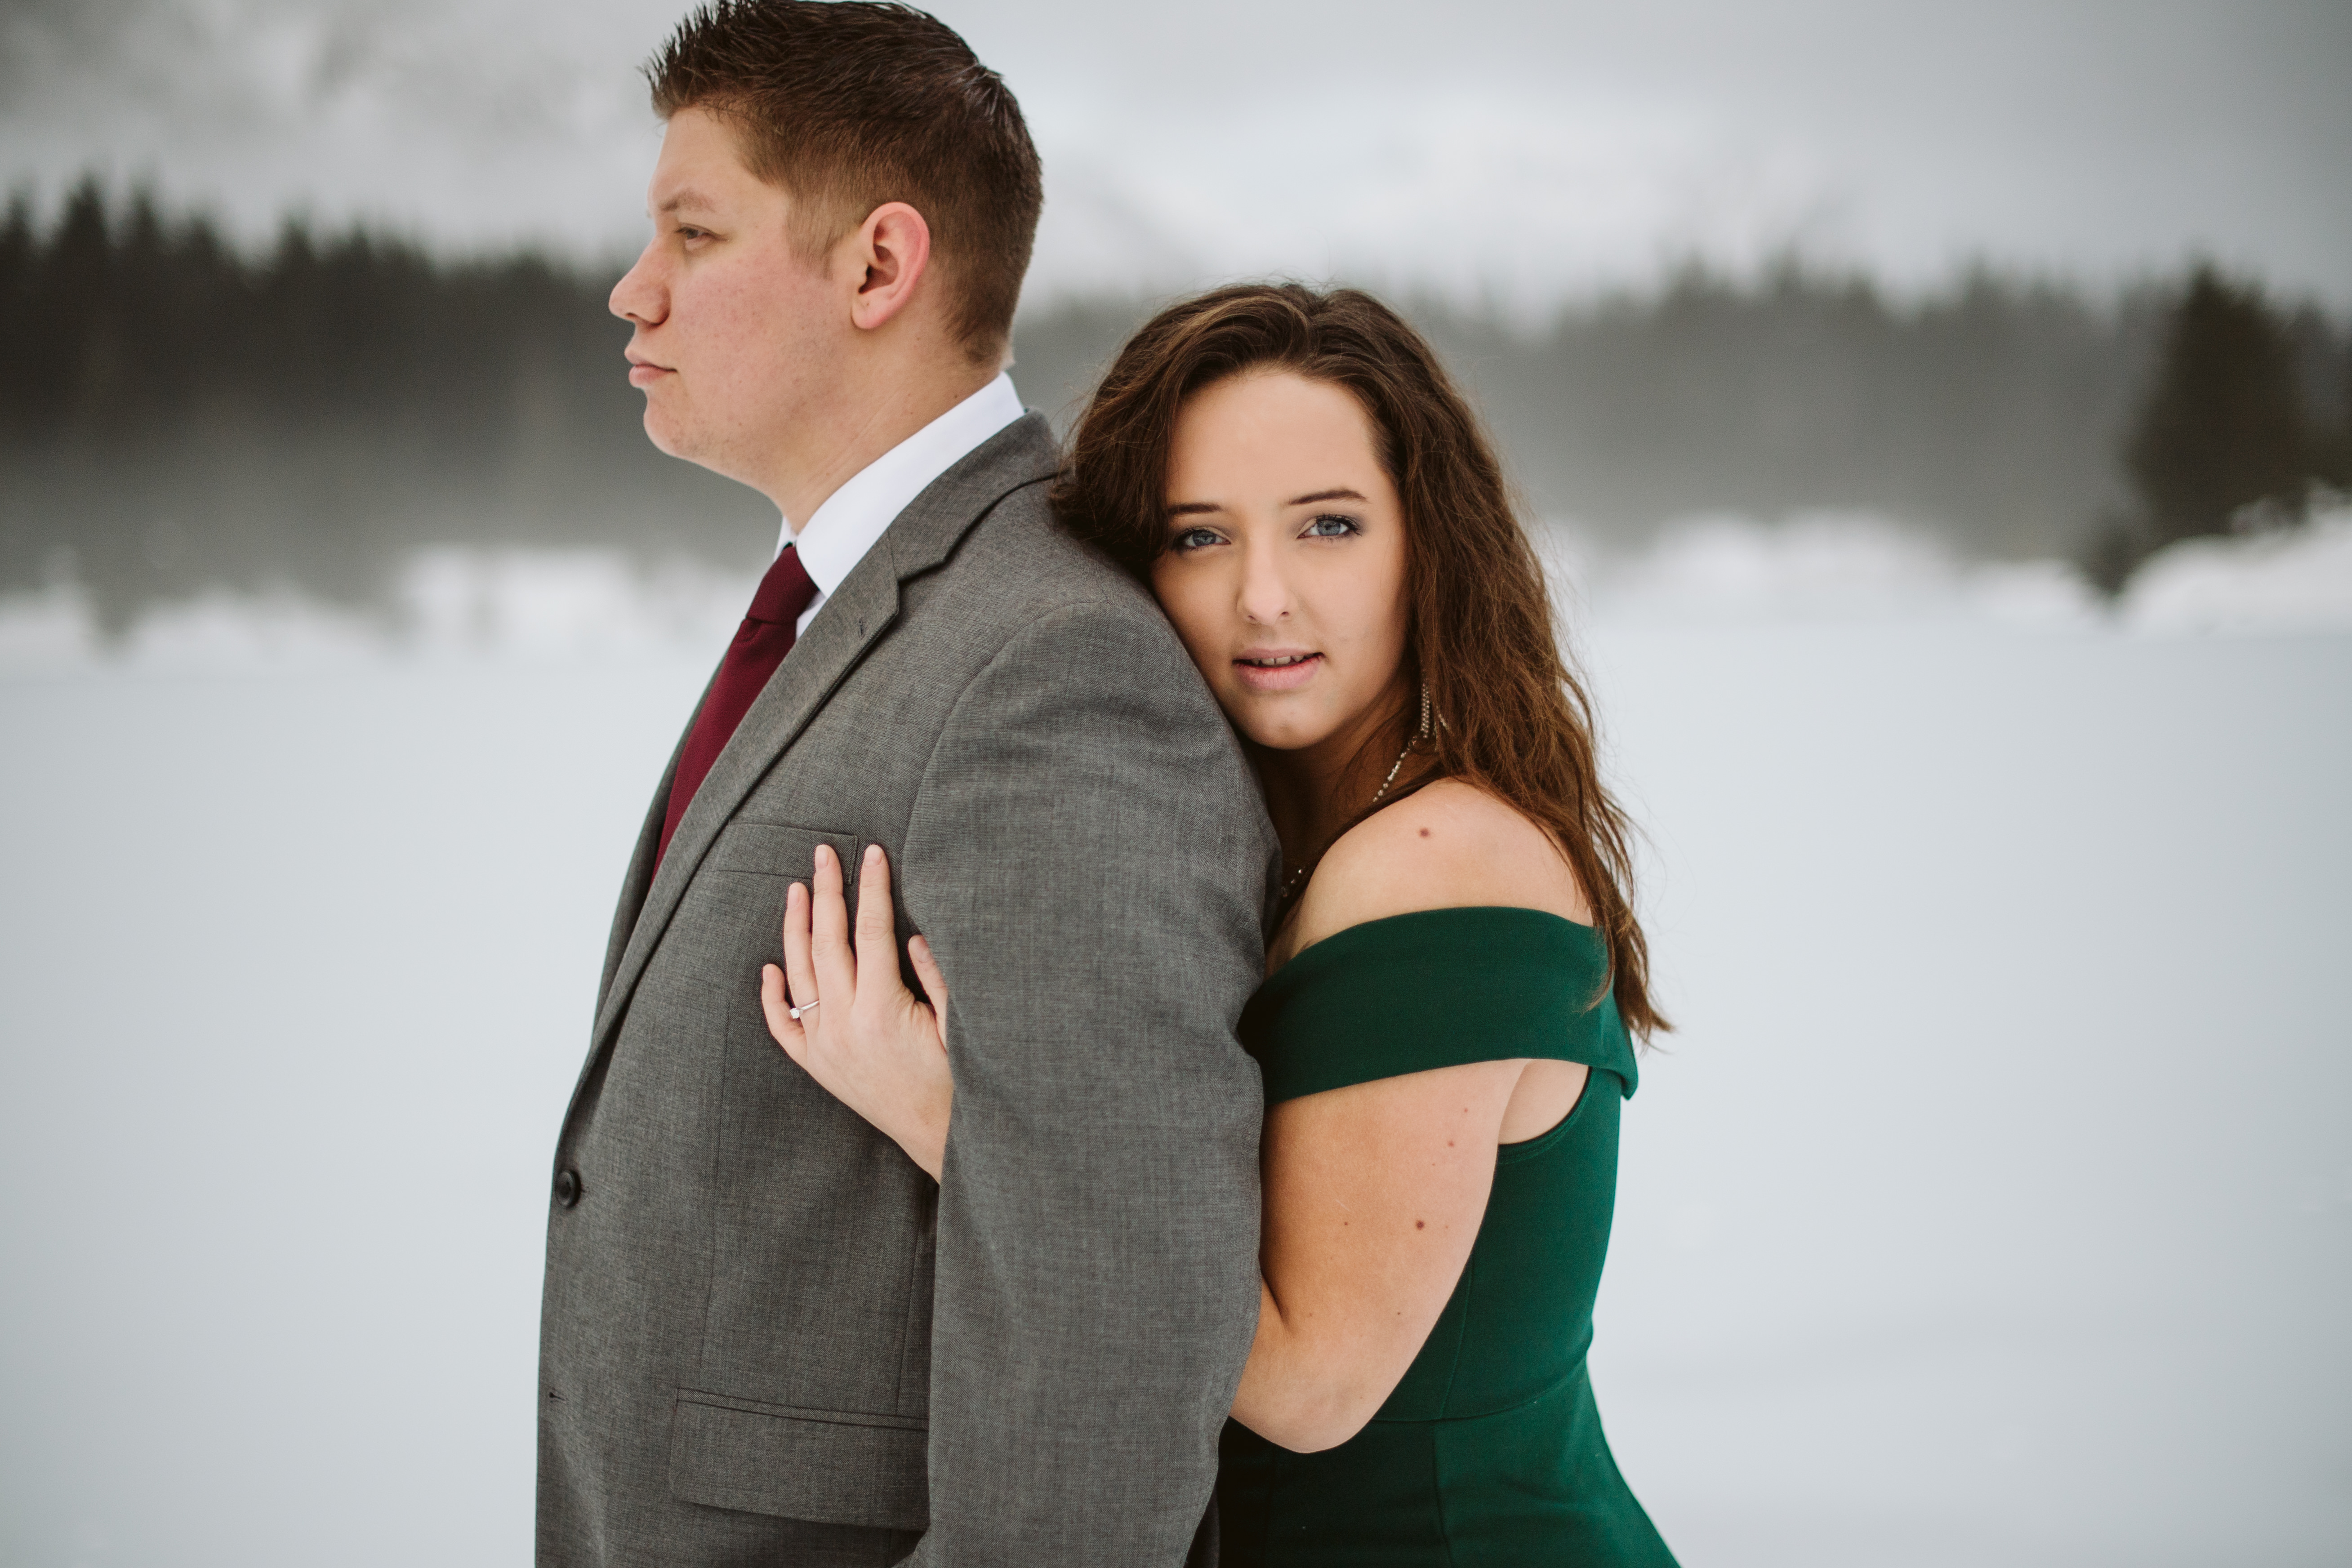 snoqualmie pass and gold creek pond engagement photos